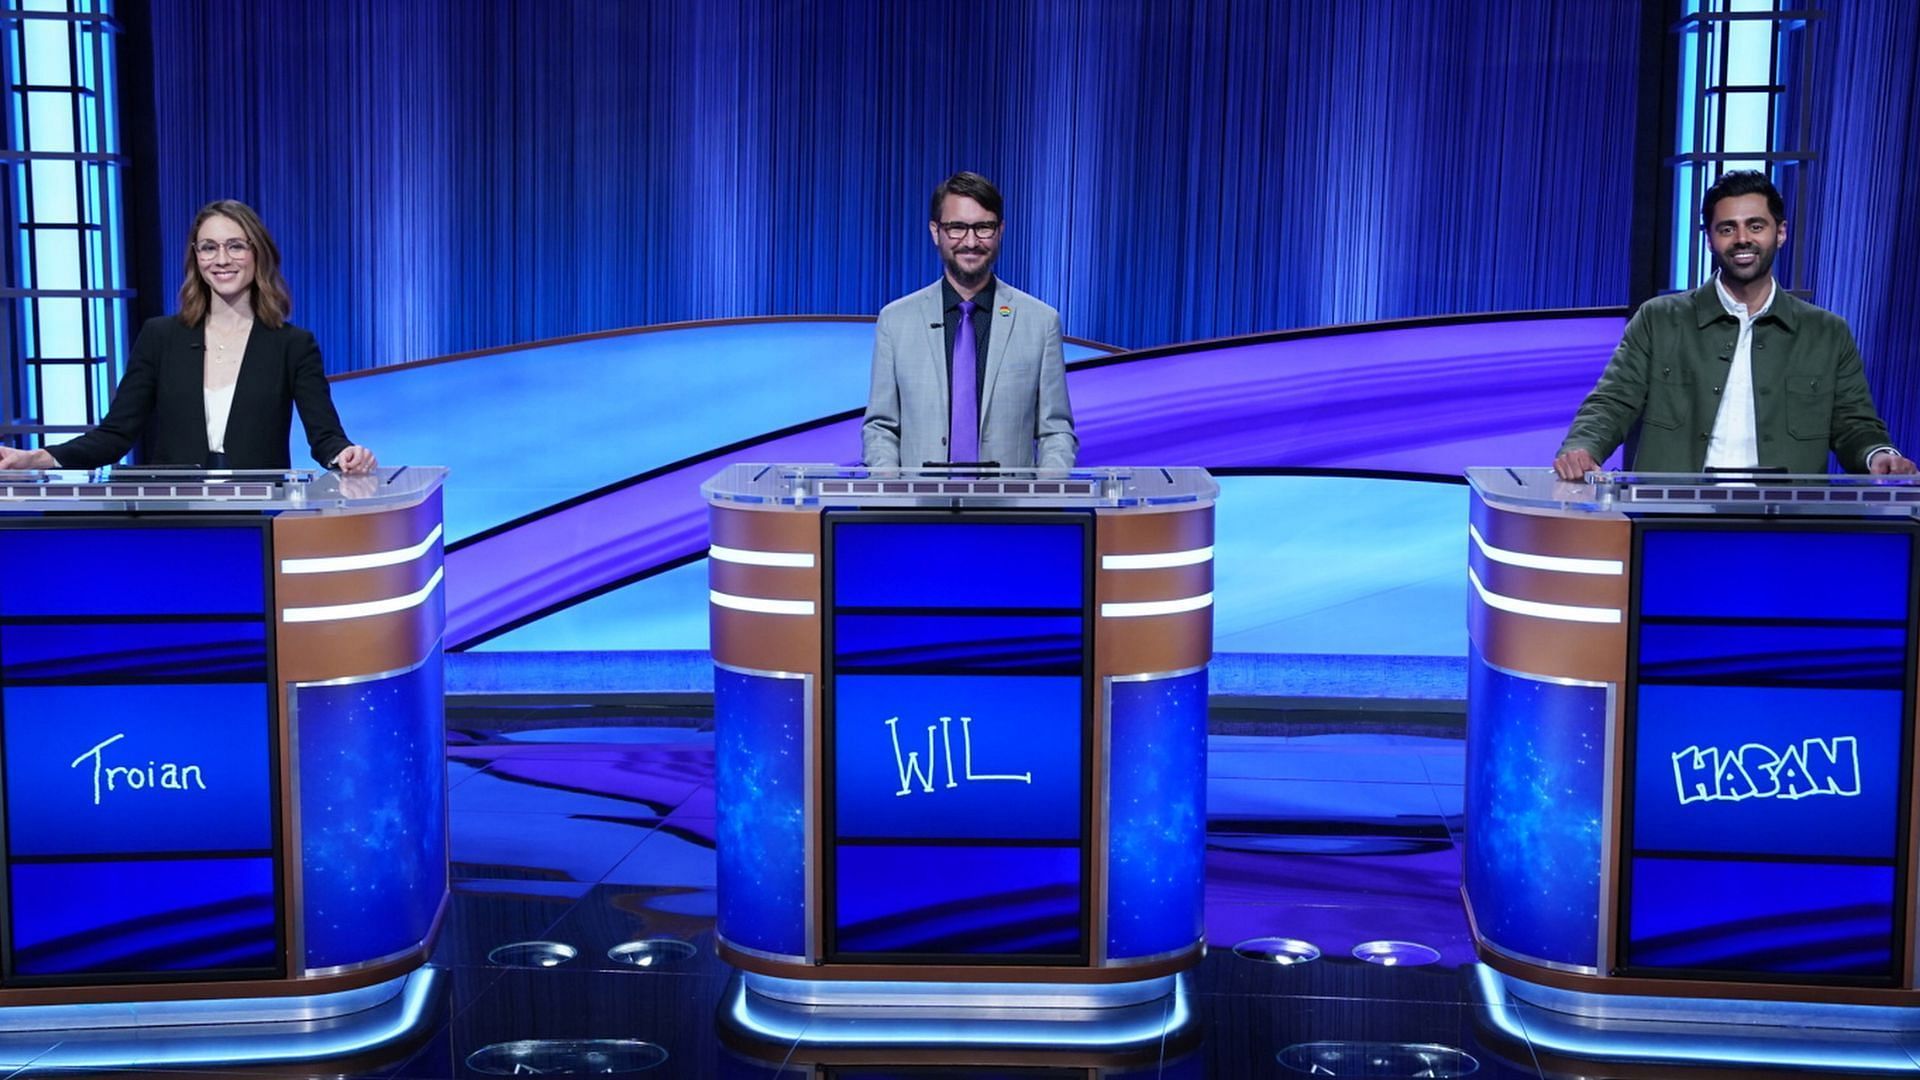 Celebrity Jeopardy! is set to air a new episode this Sunday